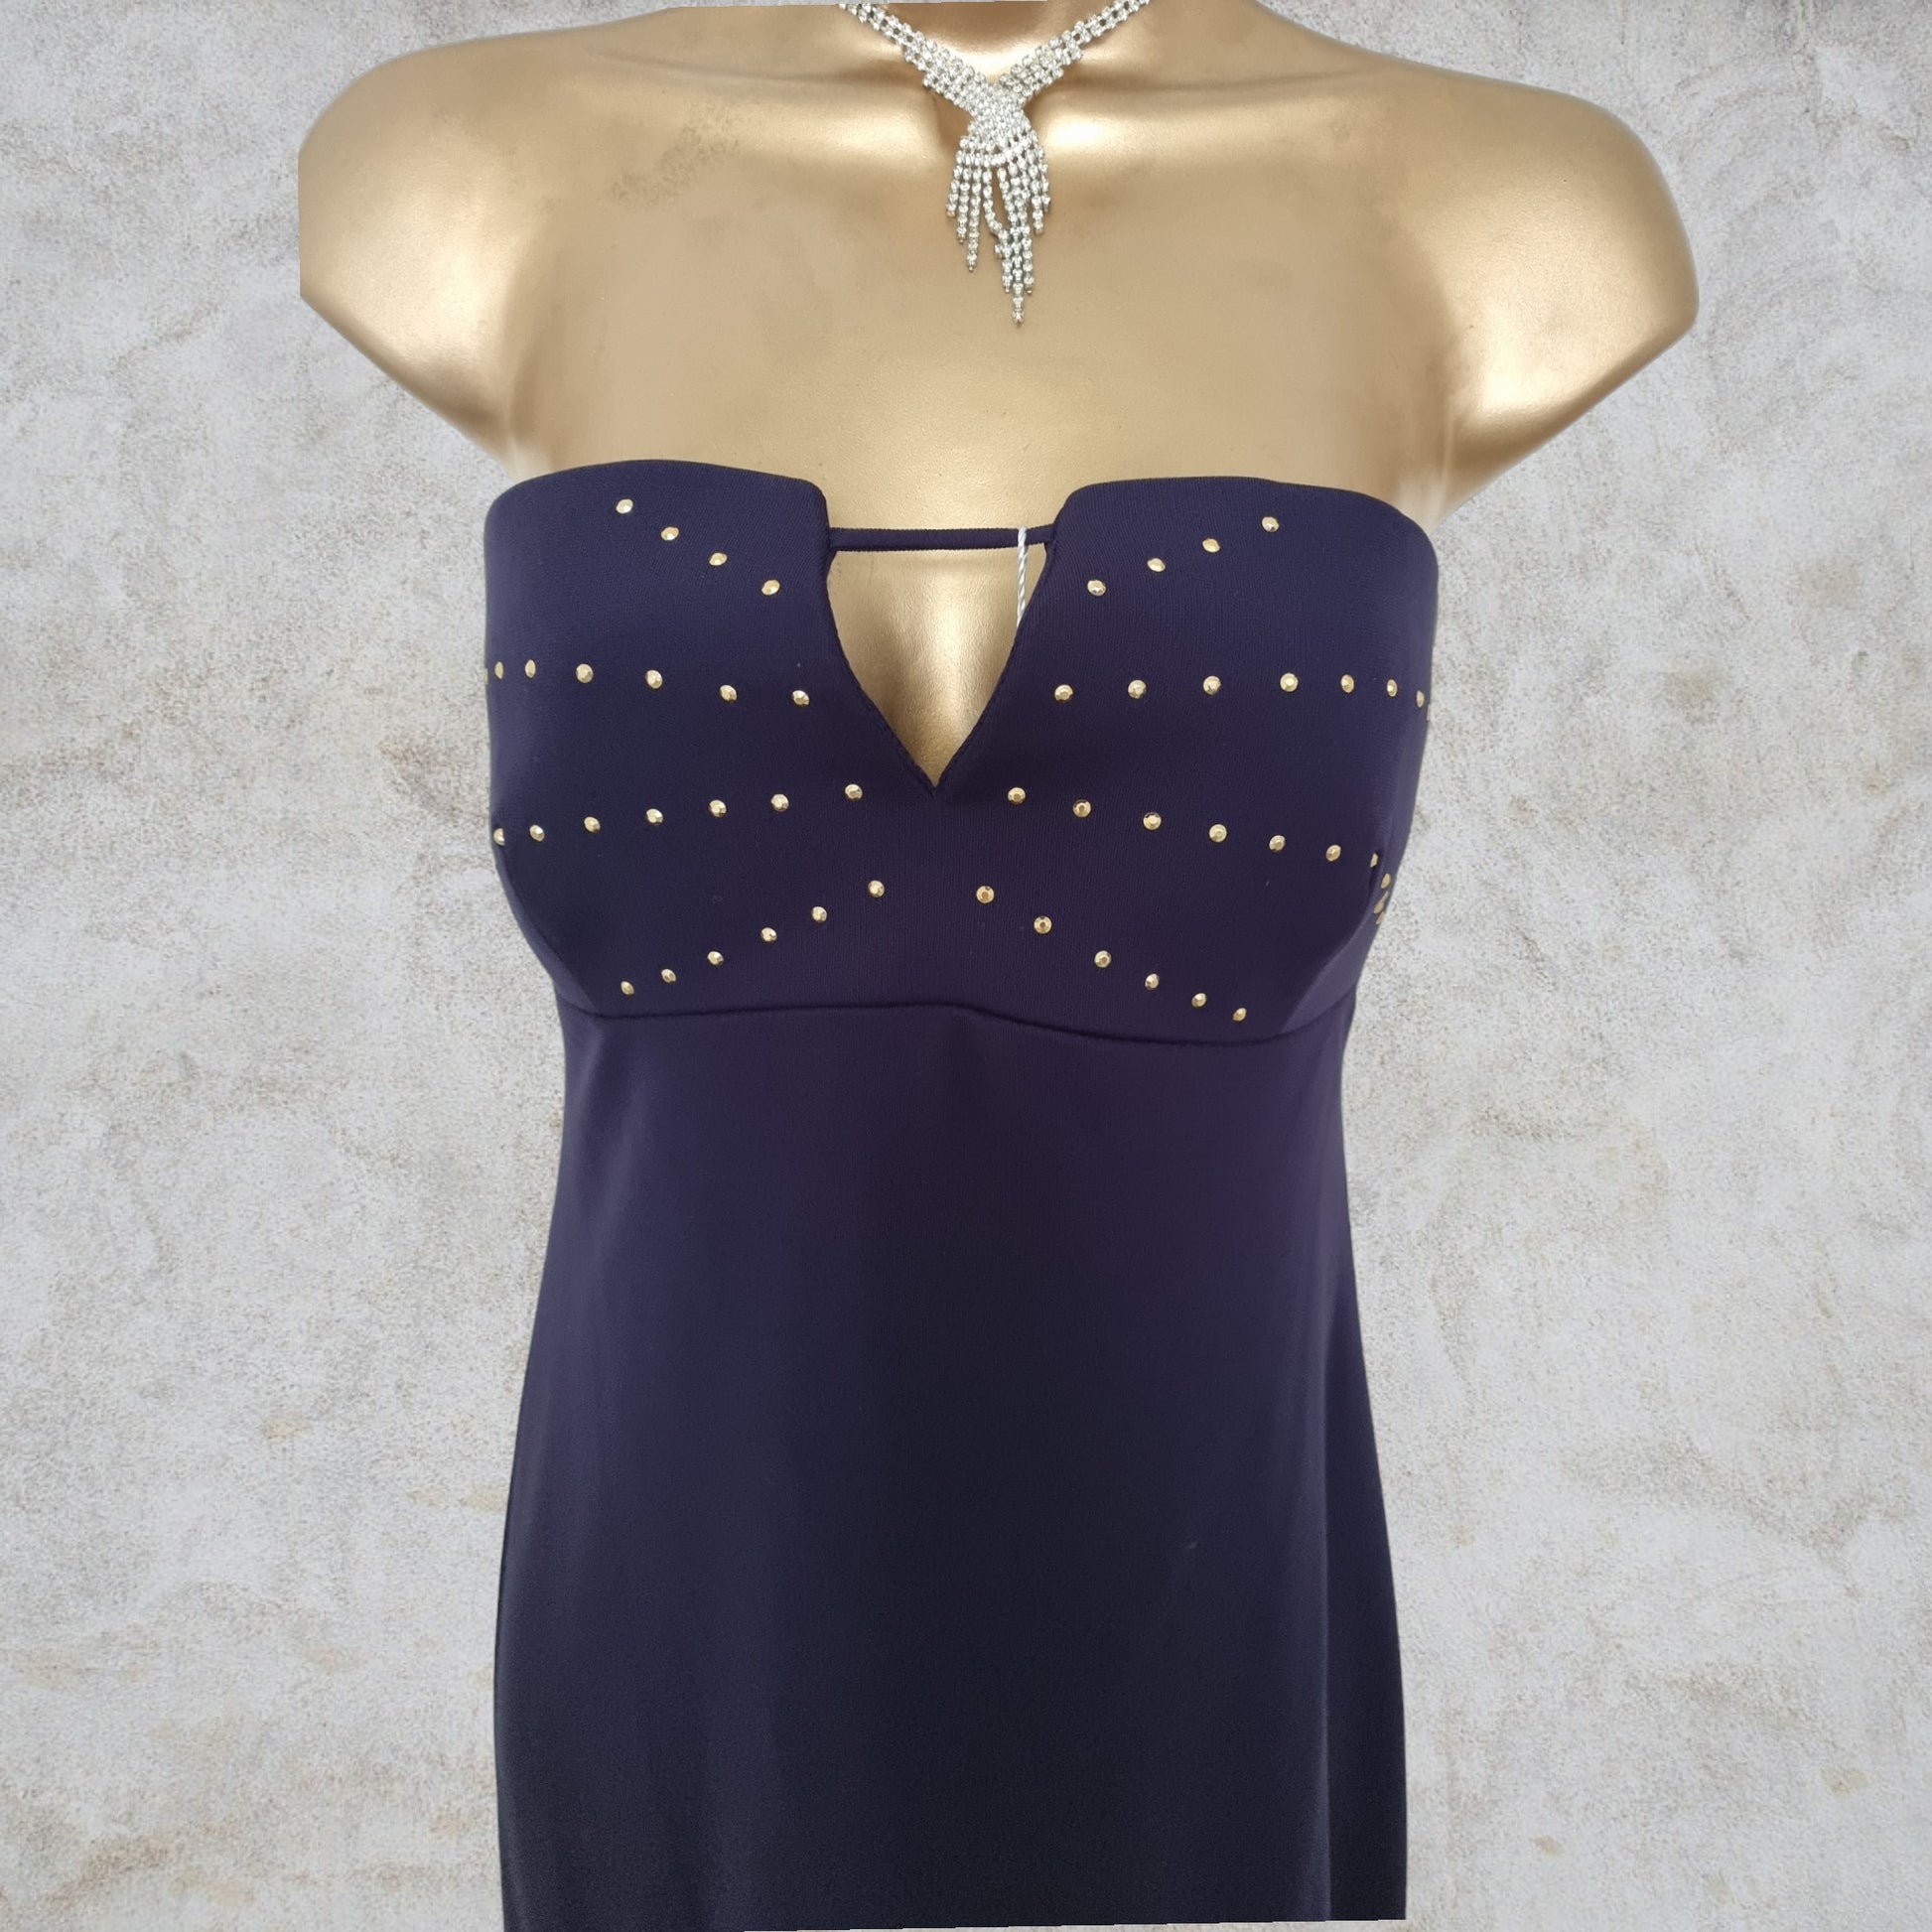 Versace Jeans Couture Navy Strapless Mini Dress UK 6 US 8 EU 36 IT 42 Timeless Fashions